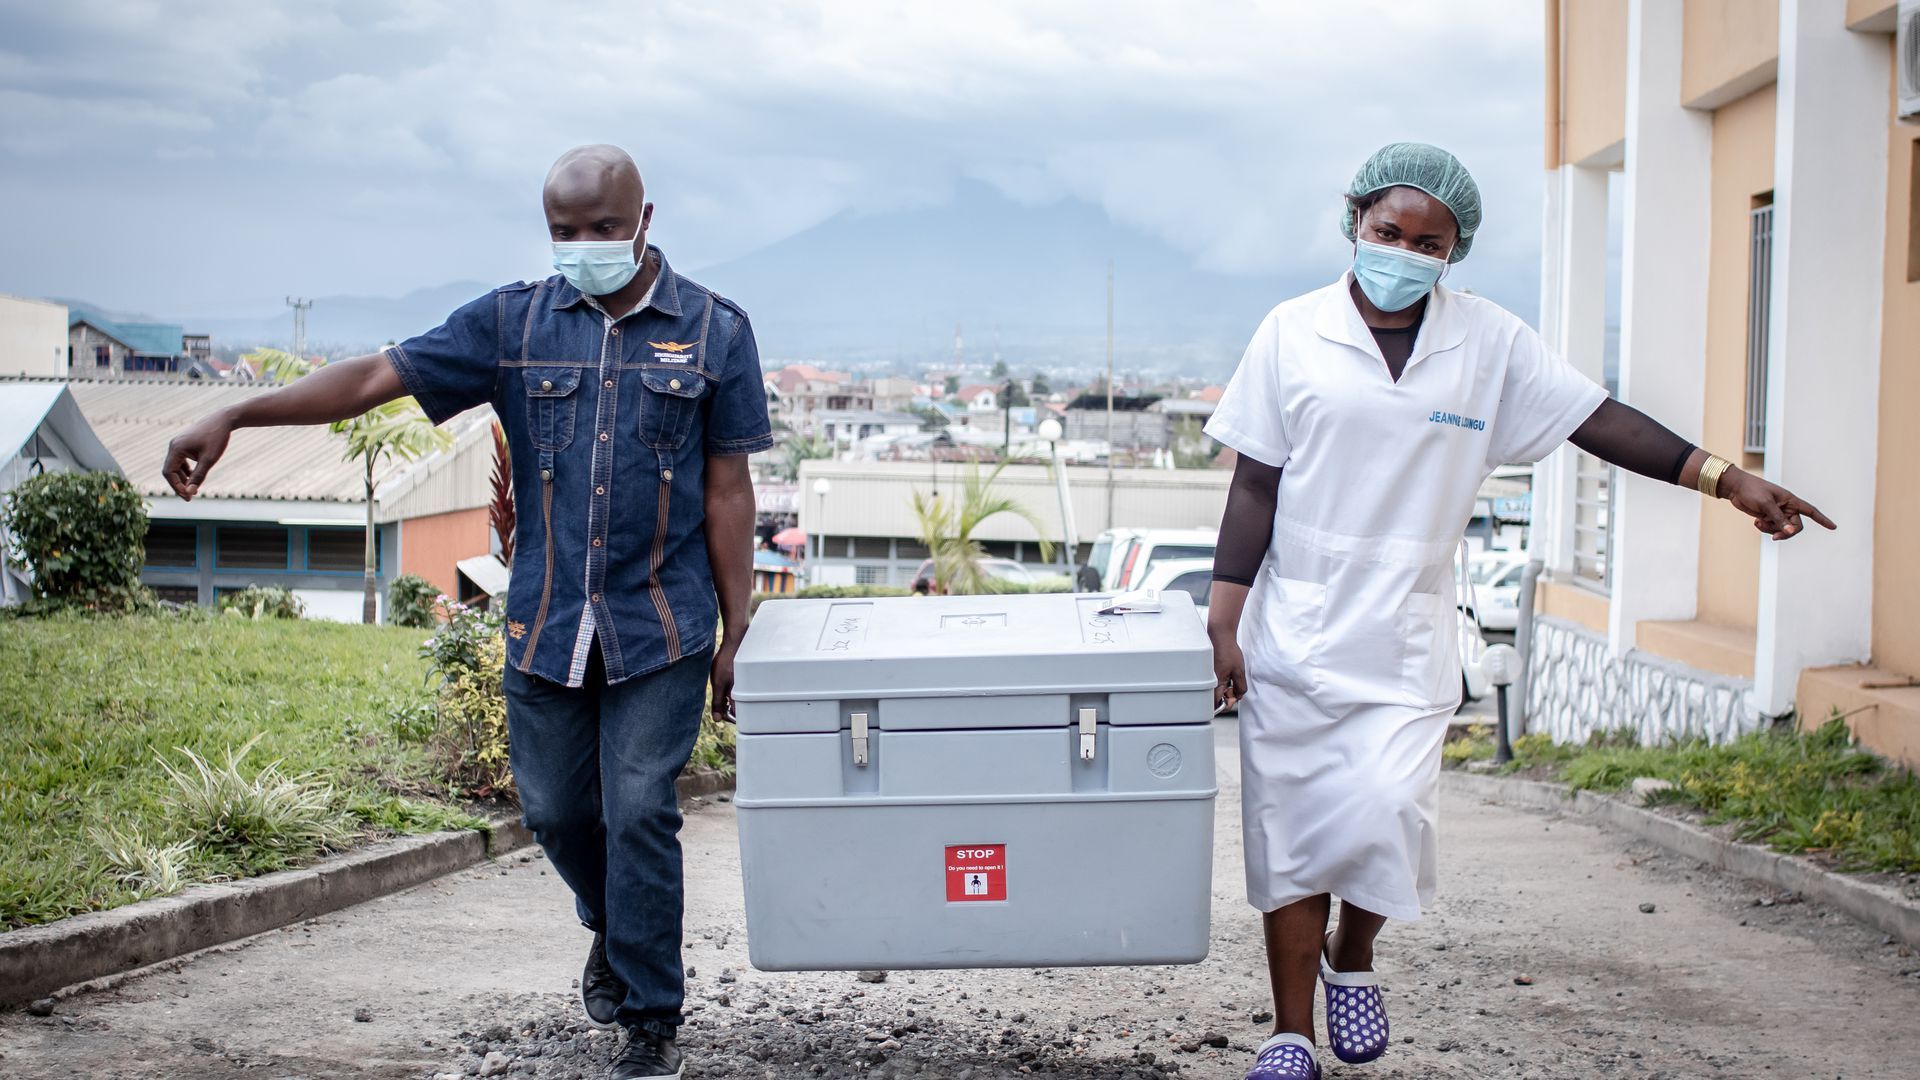 Carrying doses in Goma, DRC. Photo: Guerchom Ndebo/Getty Images